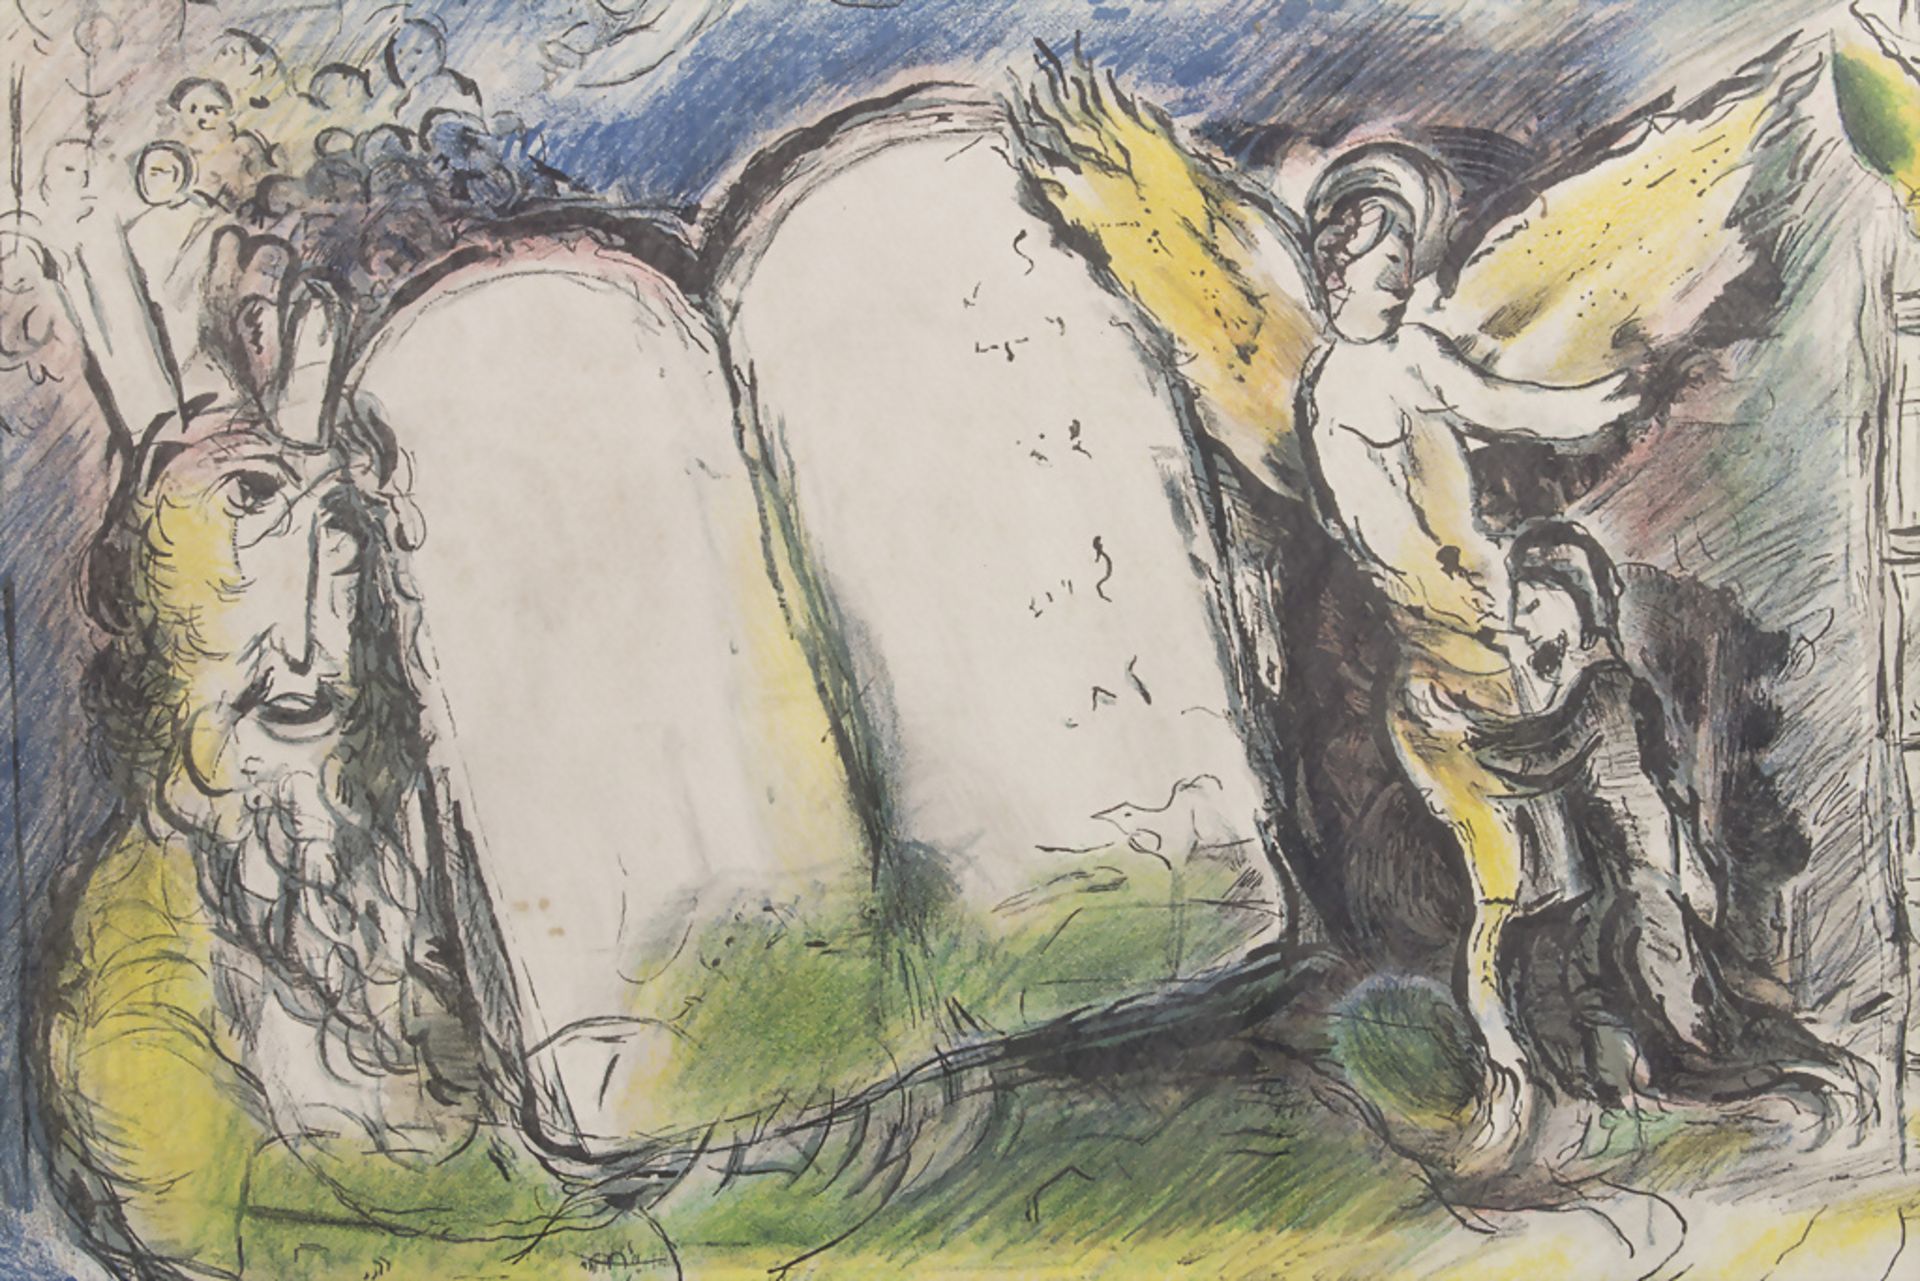 Marc Chagall (1887-1985), 'Die Vision Mose' / 'The mission of Moses' - Image 3 of 4